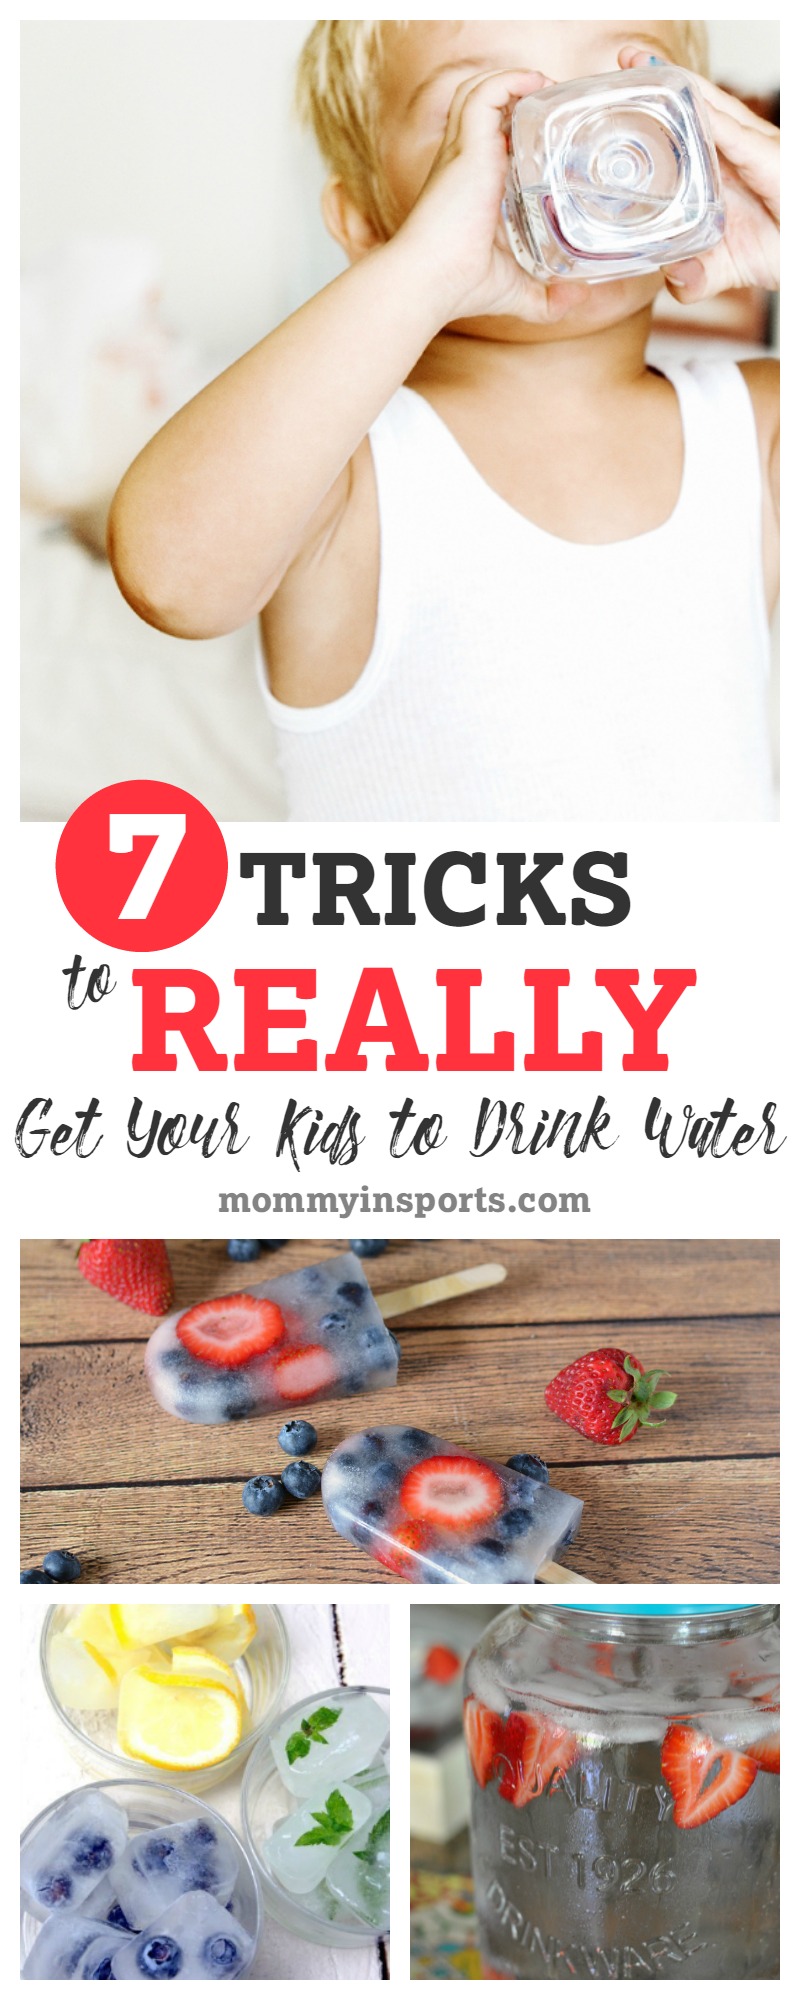 Struggling to get your kids to drink water? We all are! But these 7 tricks really are simple, fun, and work! 